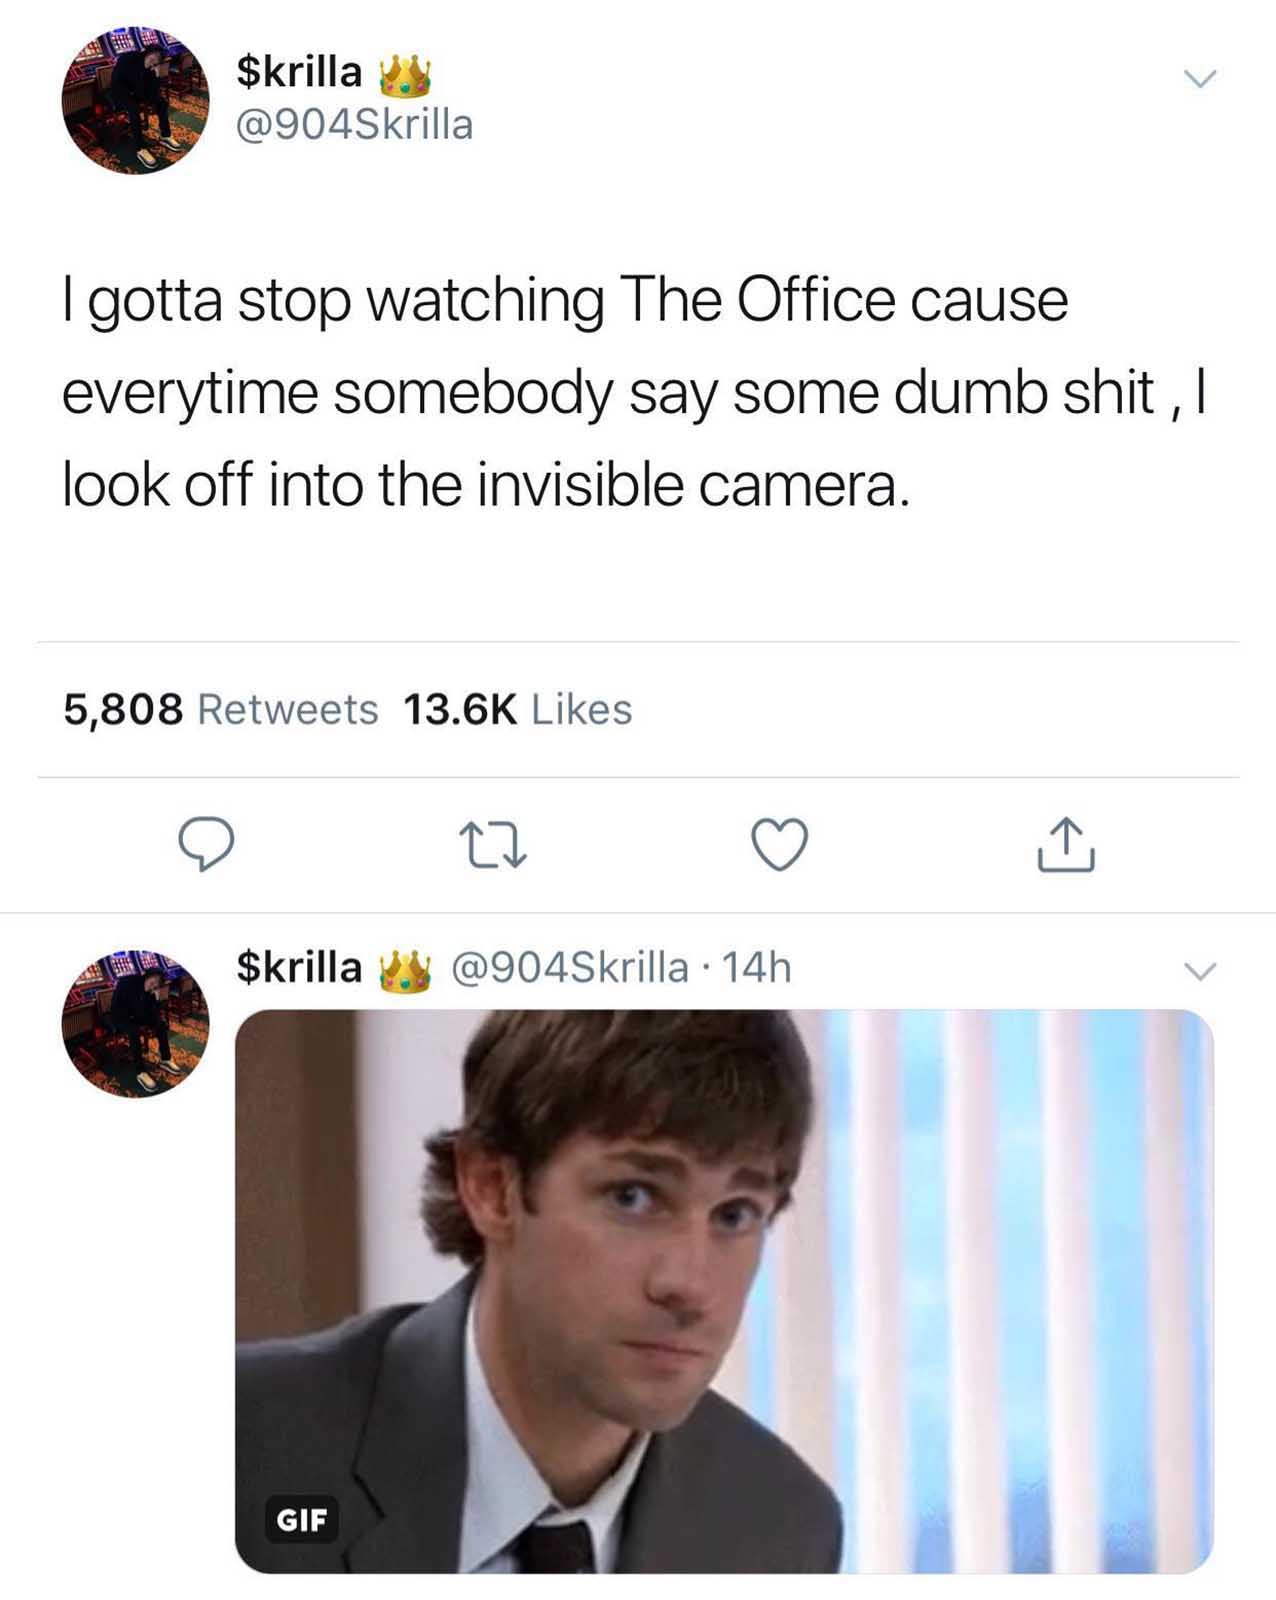 twitter memes funny tweets - v $krilla I gotta stop watching The Office cause everytime somebody say some dumb shit, I look off into the invisible camera. 5,808 $krilla 14h Gif